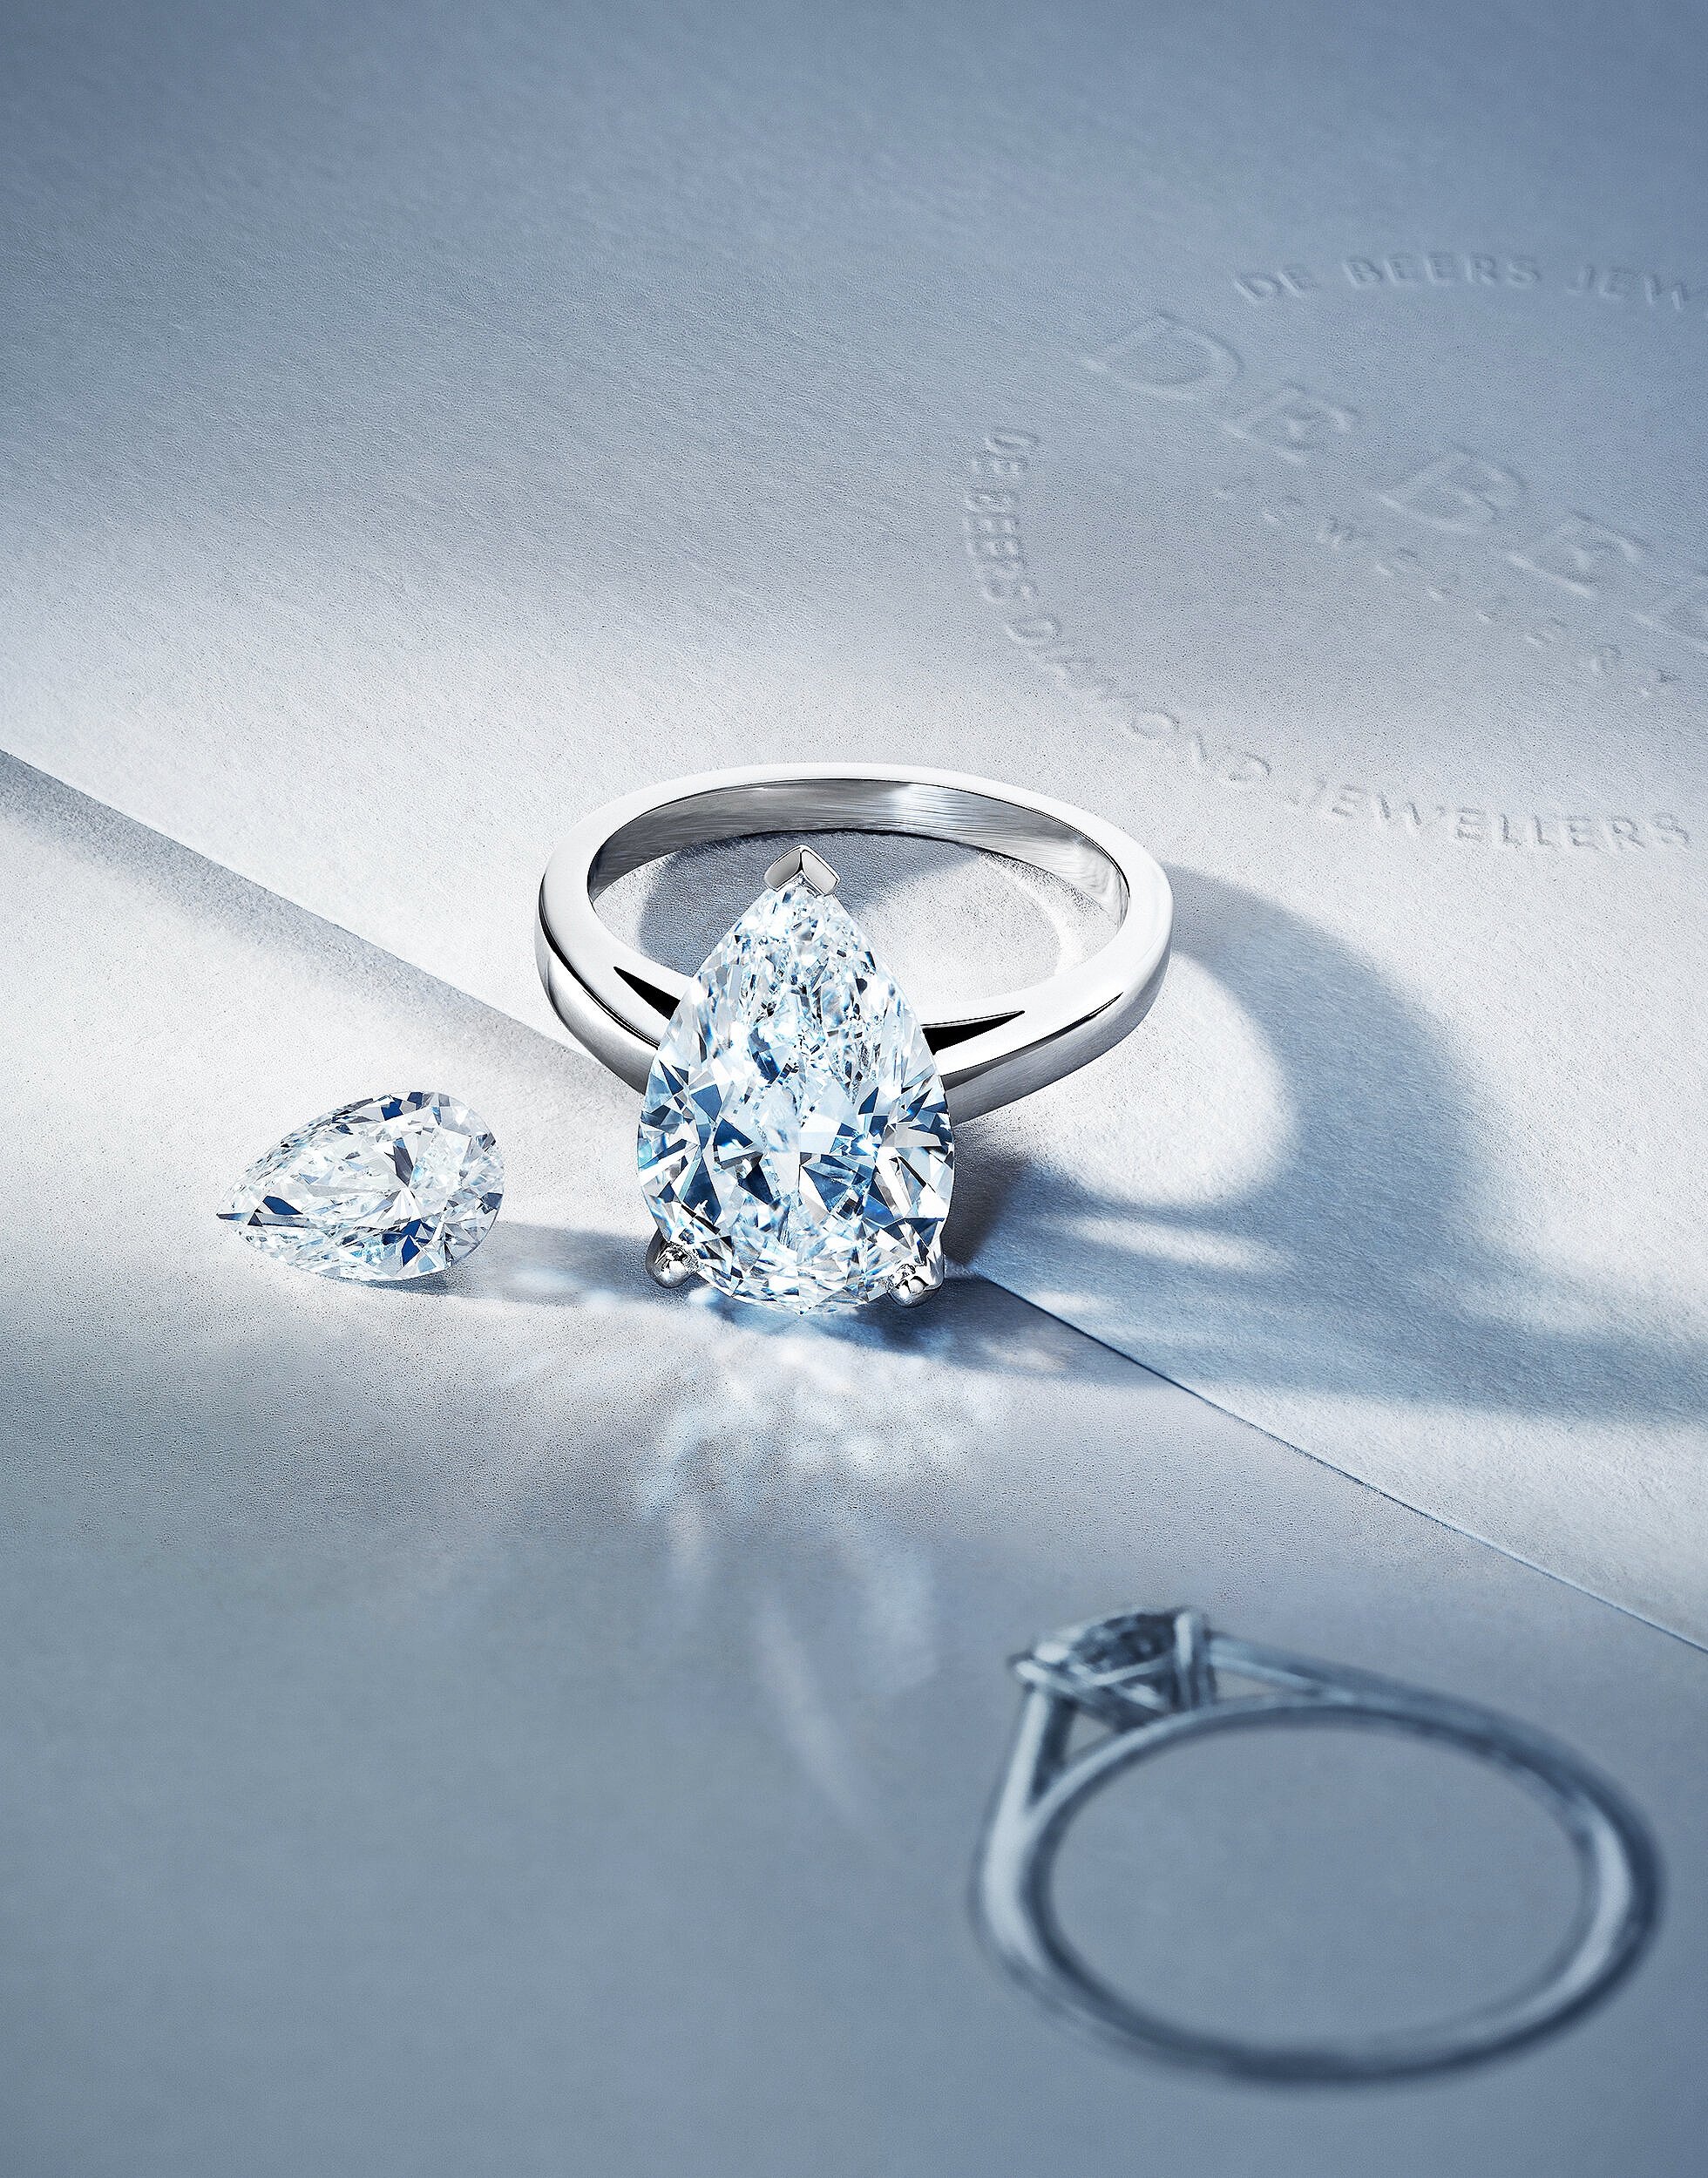  Diamond ring and loose diamond shot for De Beers 